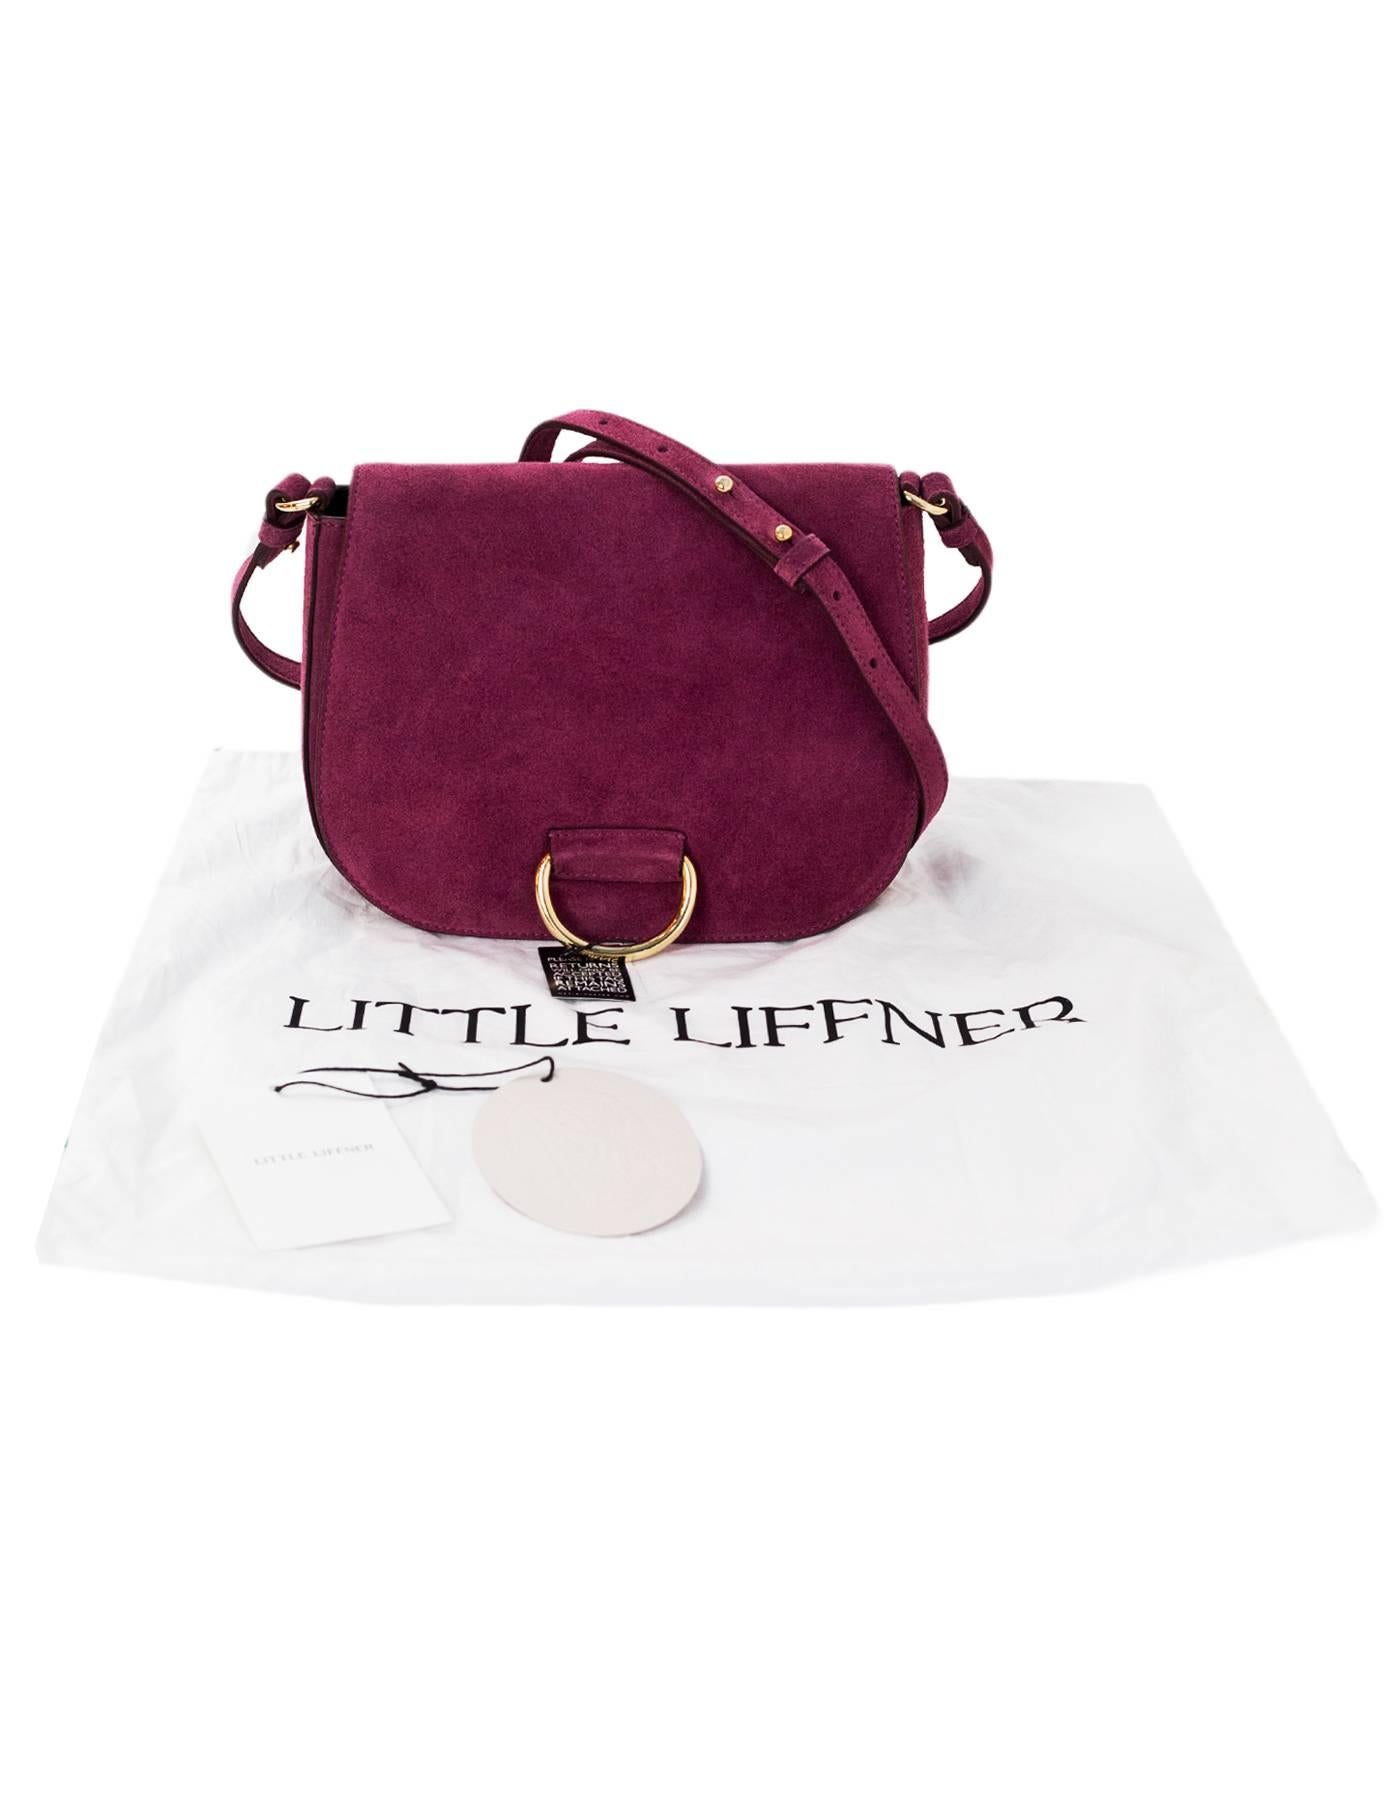 Little Liffner Raspberry Suede Saddle Messenger Bag NWT with DB 1